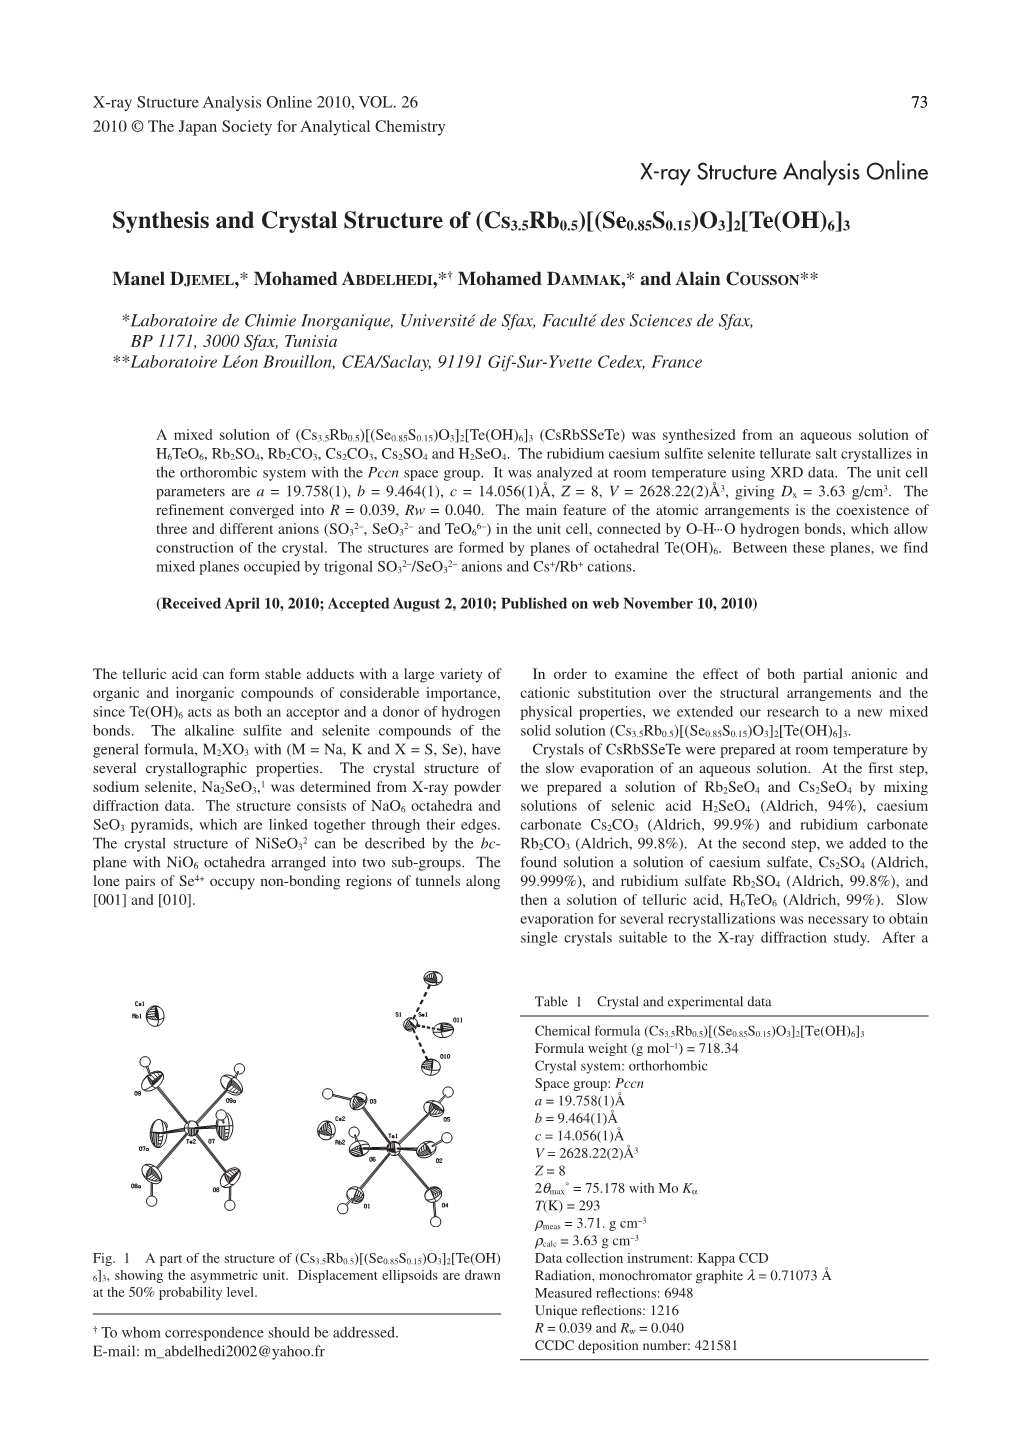 Synthesis and Crystal Structure of (Cs3.5Rb0.5)[(Se0.85S0.15)O3]2[Te(OH)6]3